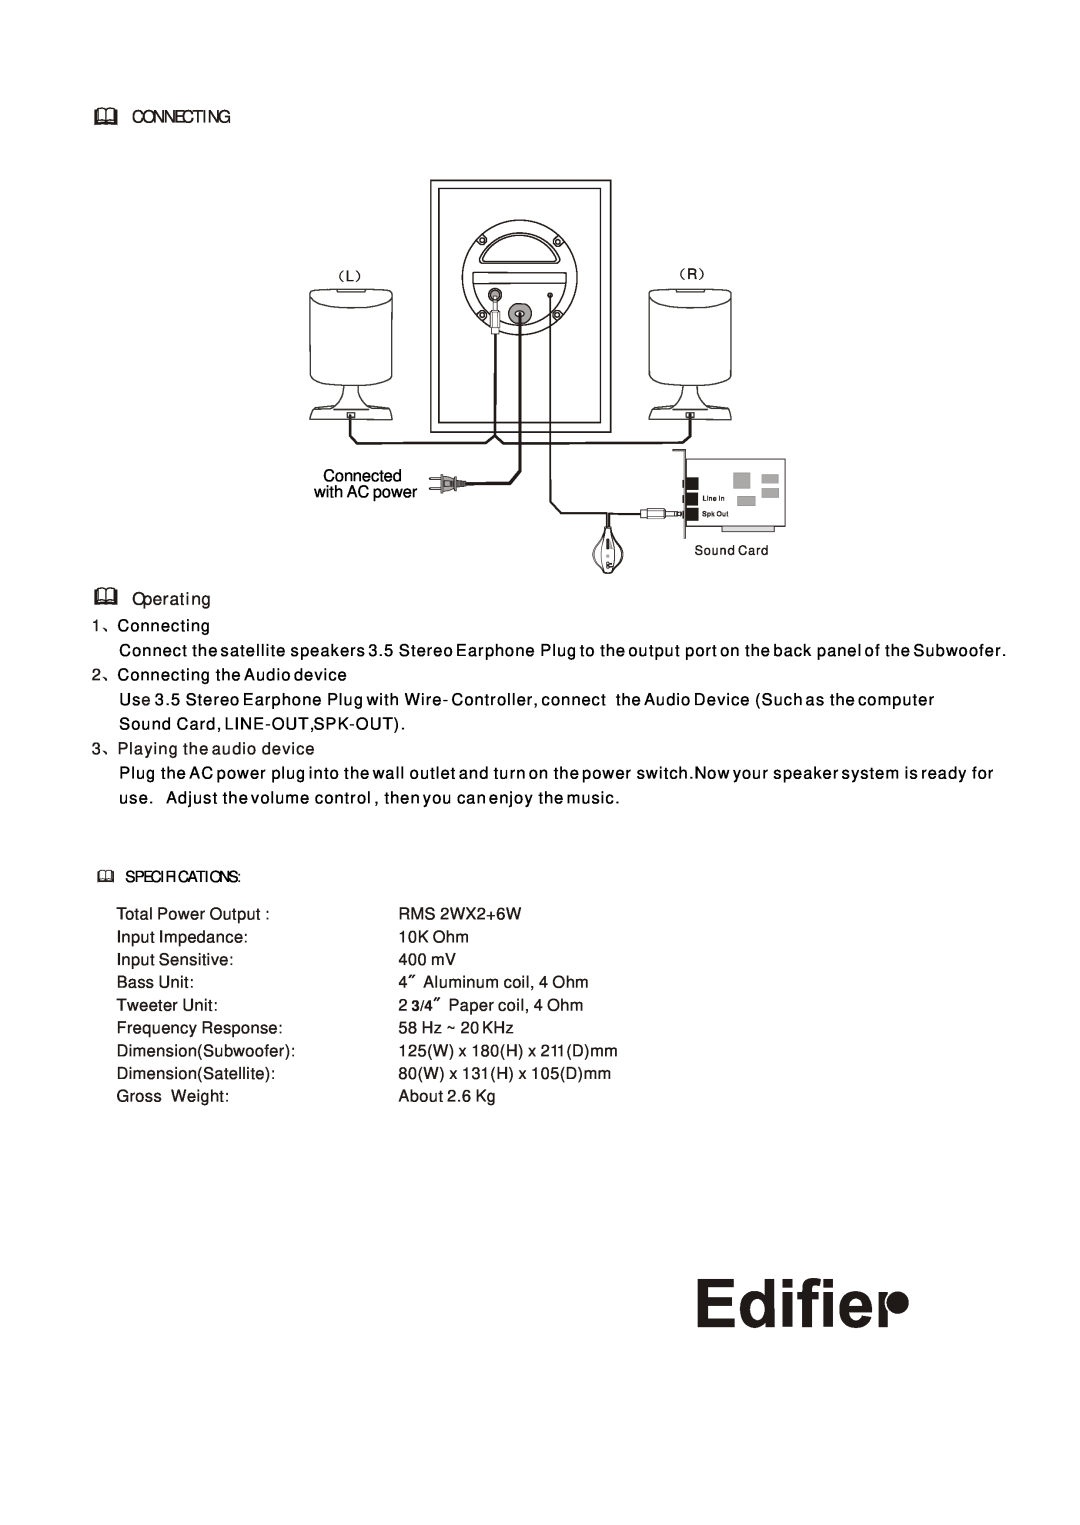 Edifier Enterprises Canada R100 user manual Connecting, Operating, Specifications 